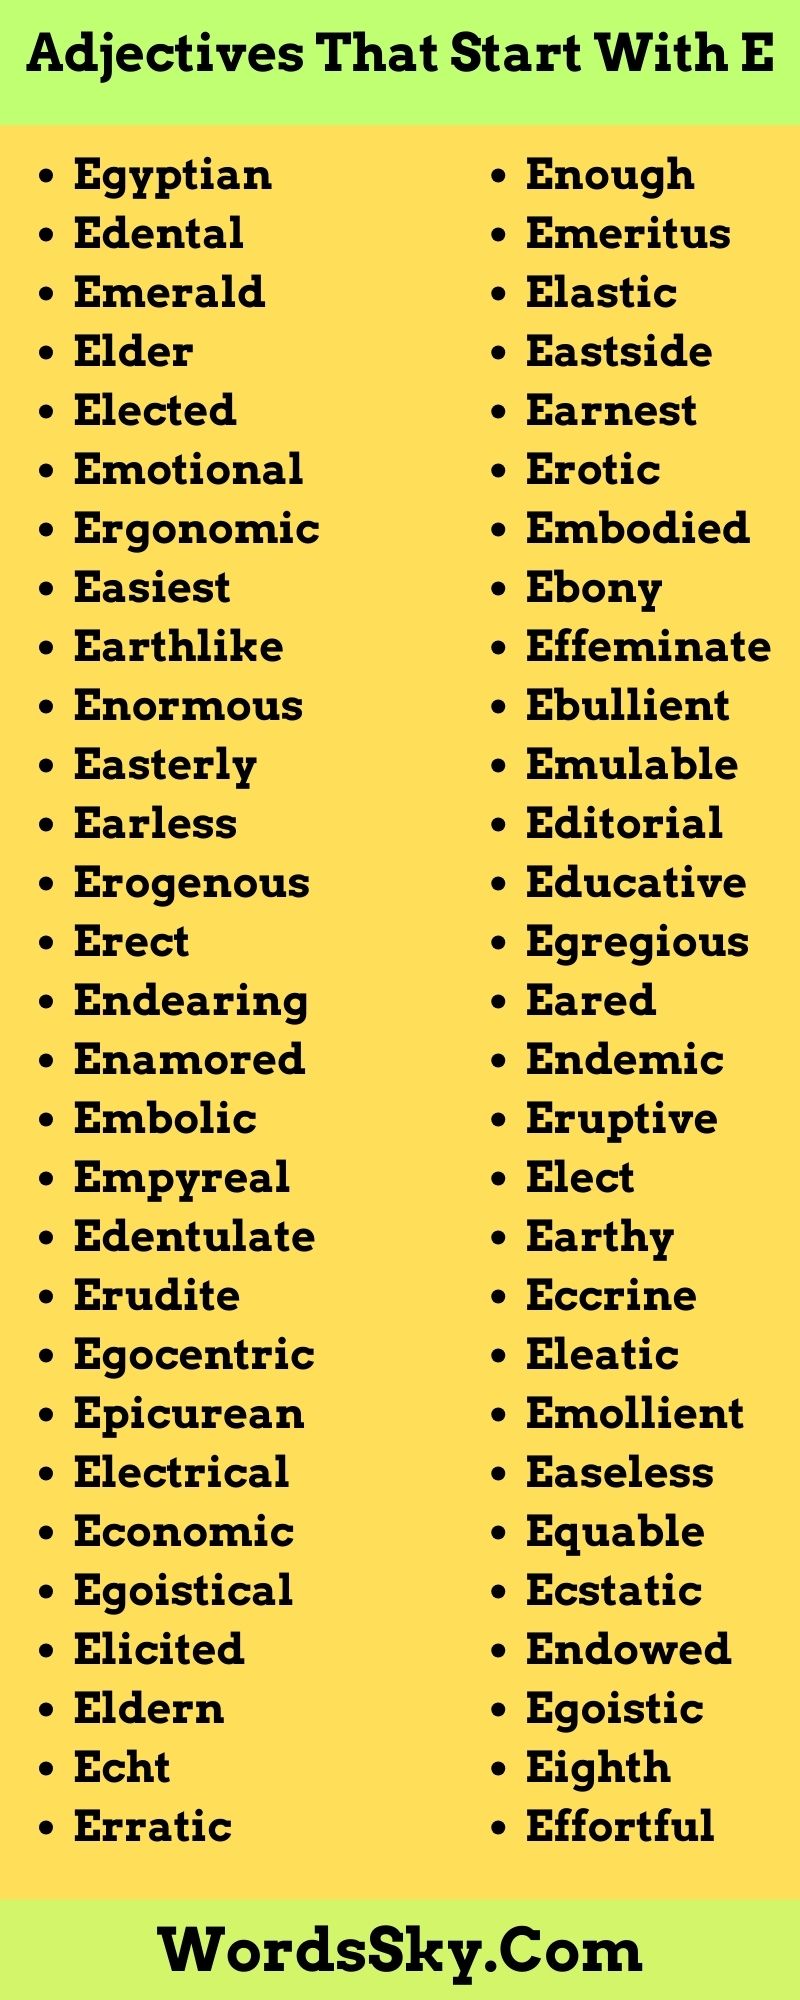 Adjectives That Start With E